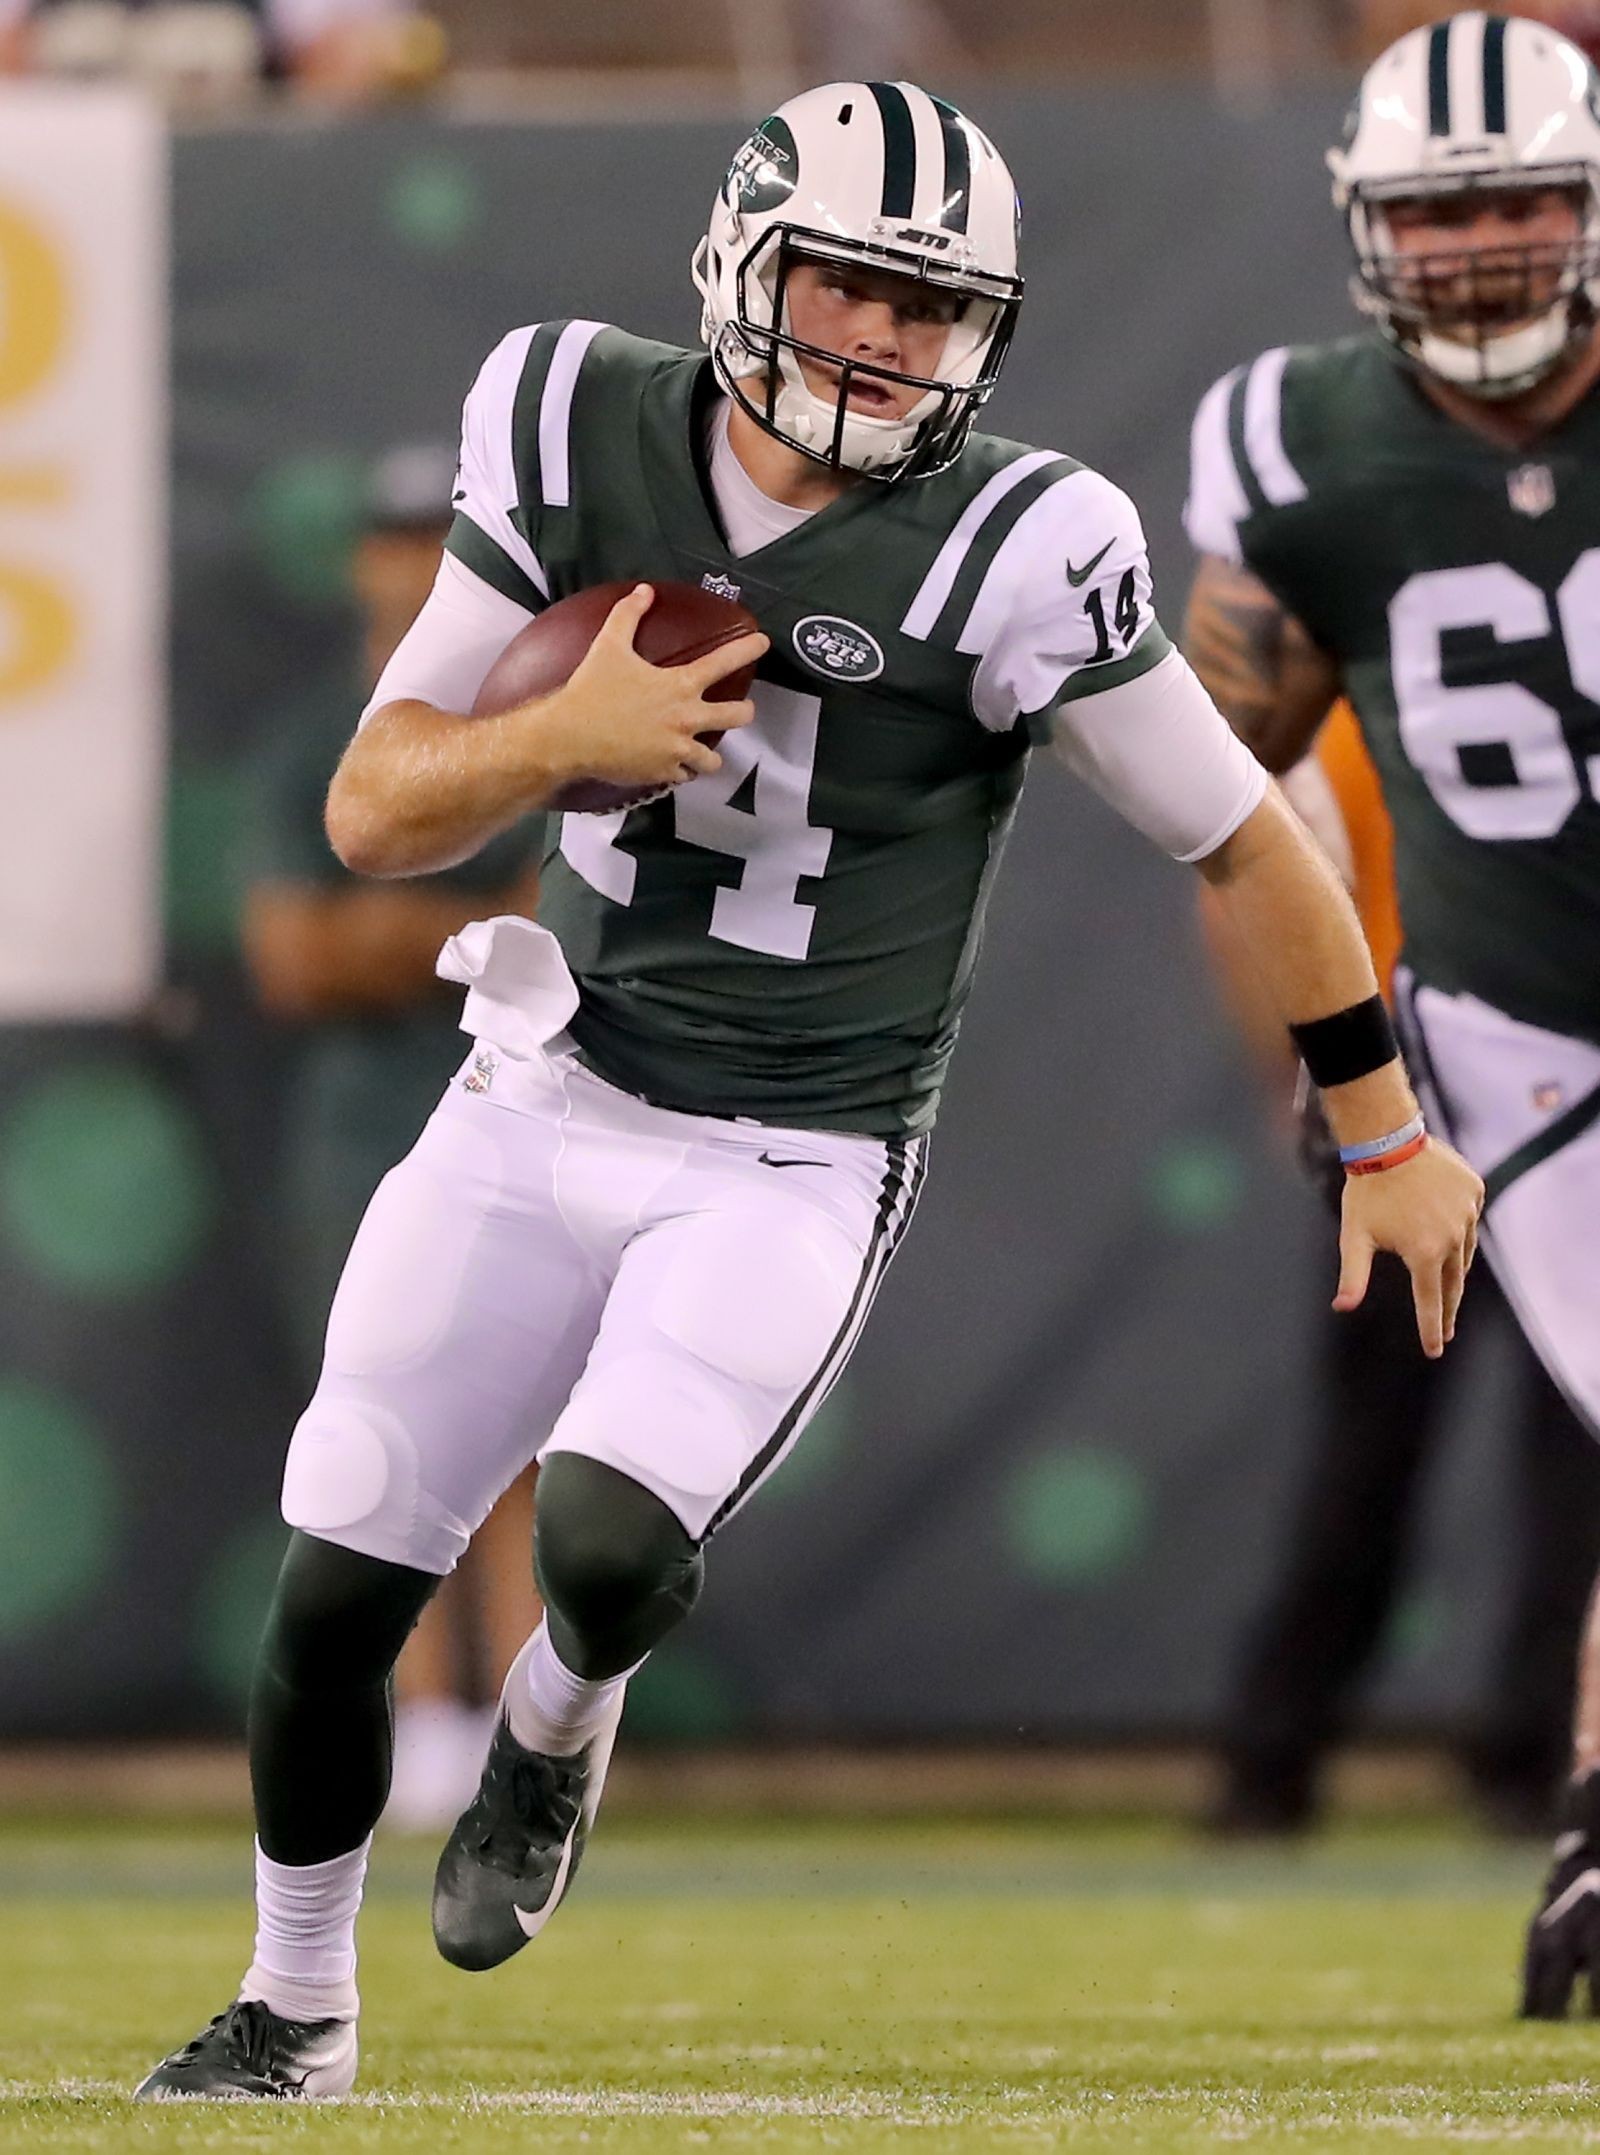 Jets should not add another quarterback for preseason games